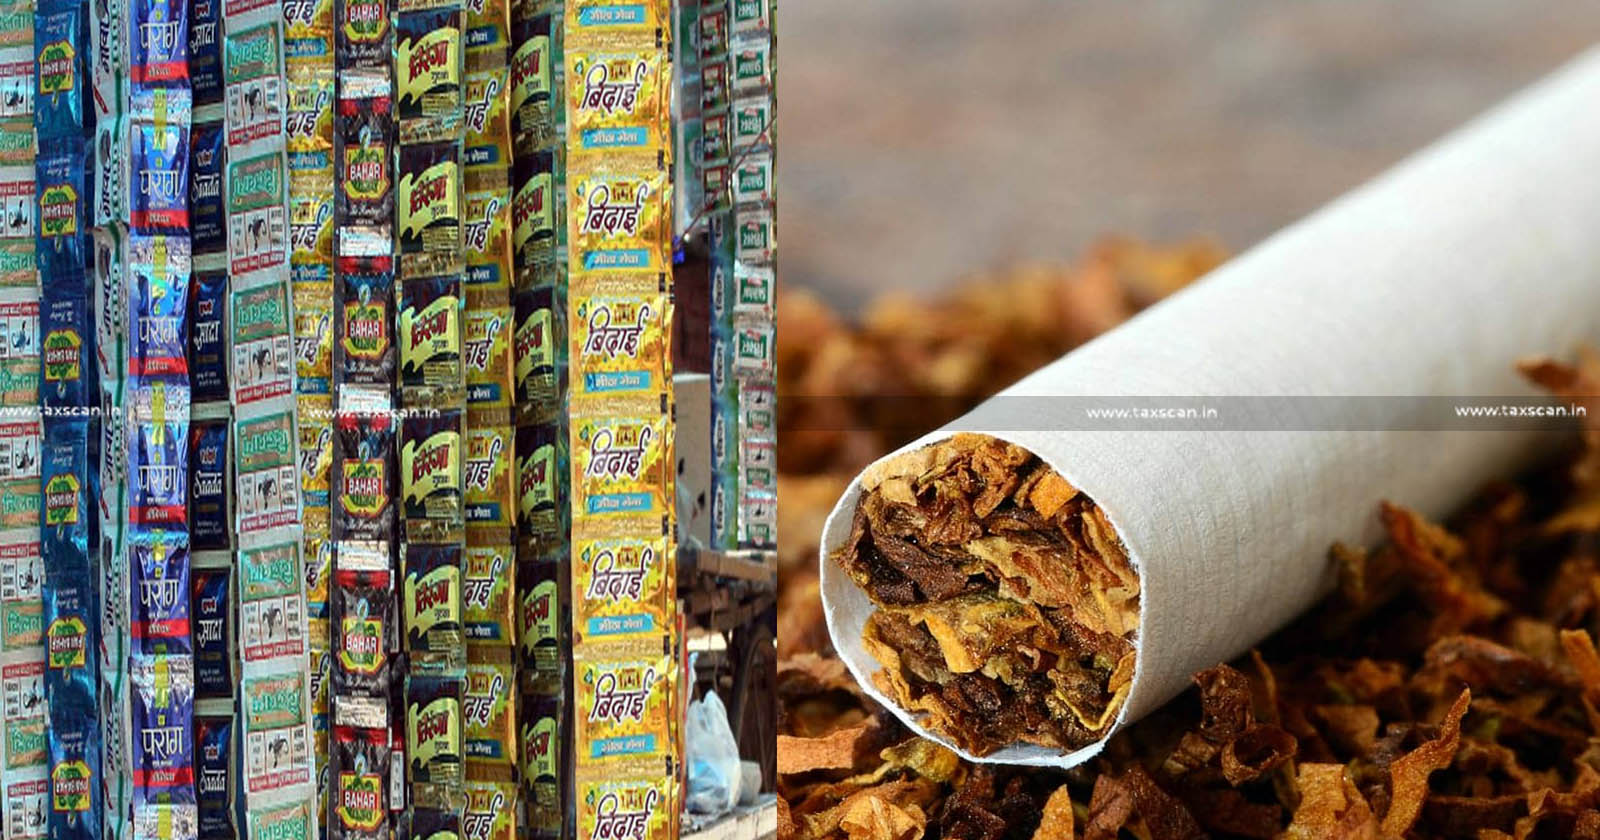 Pan Masala and Tobacco - Form SRM - Pan Masala-Tobacco - Central Govt notifies Special Procedures for Manufacturers -Manufacturers to Furnish Form SRM - taxscan